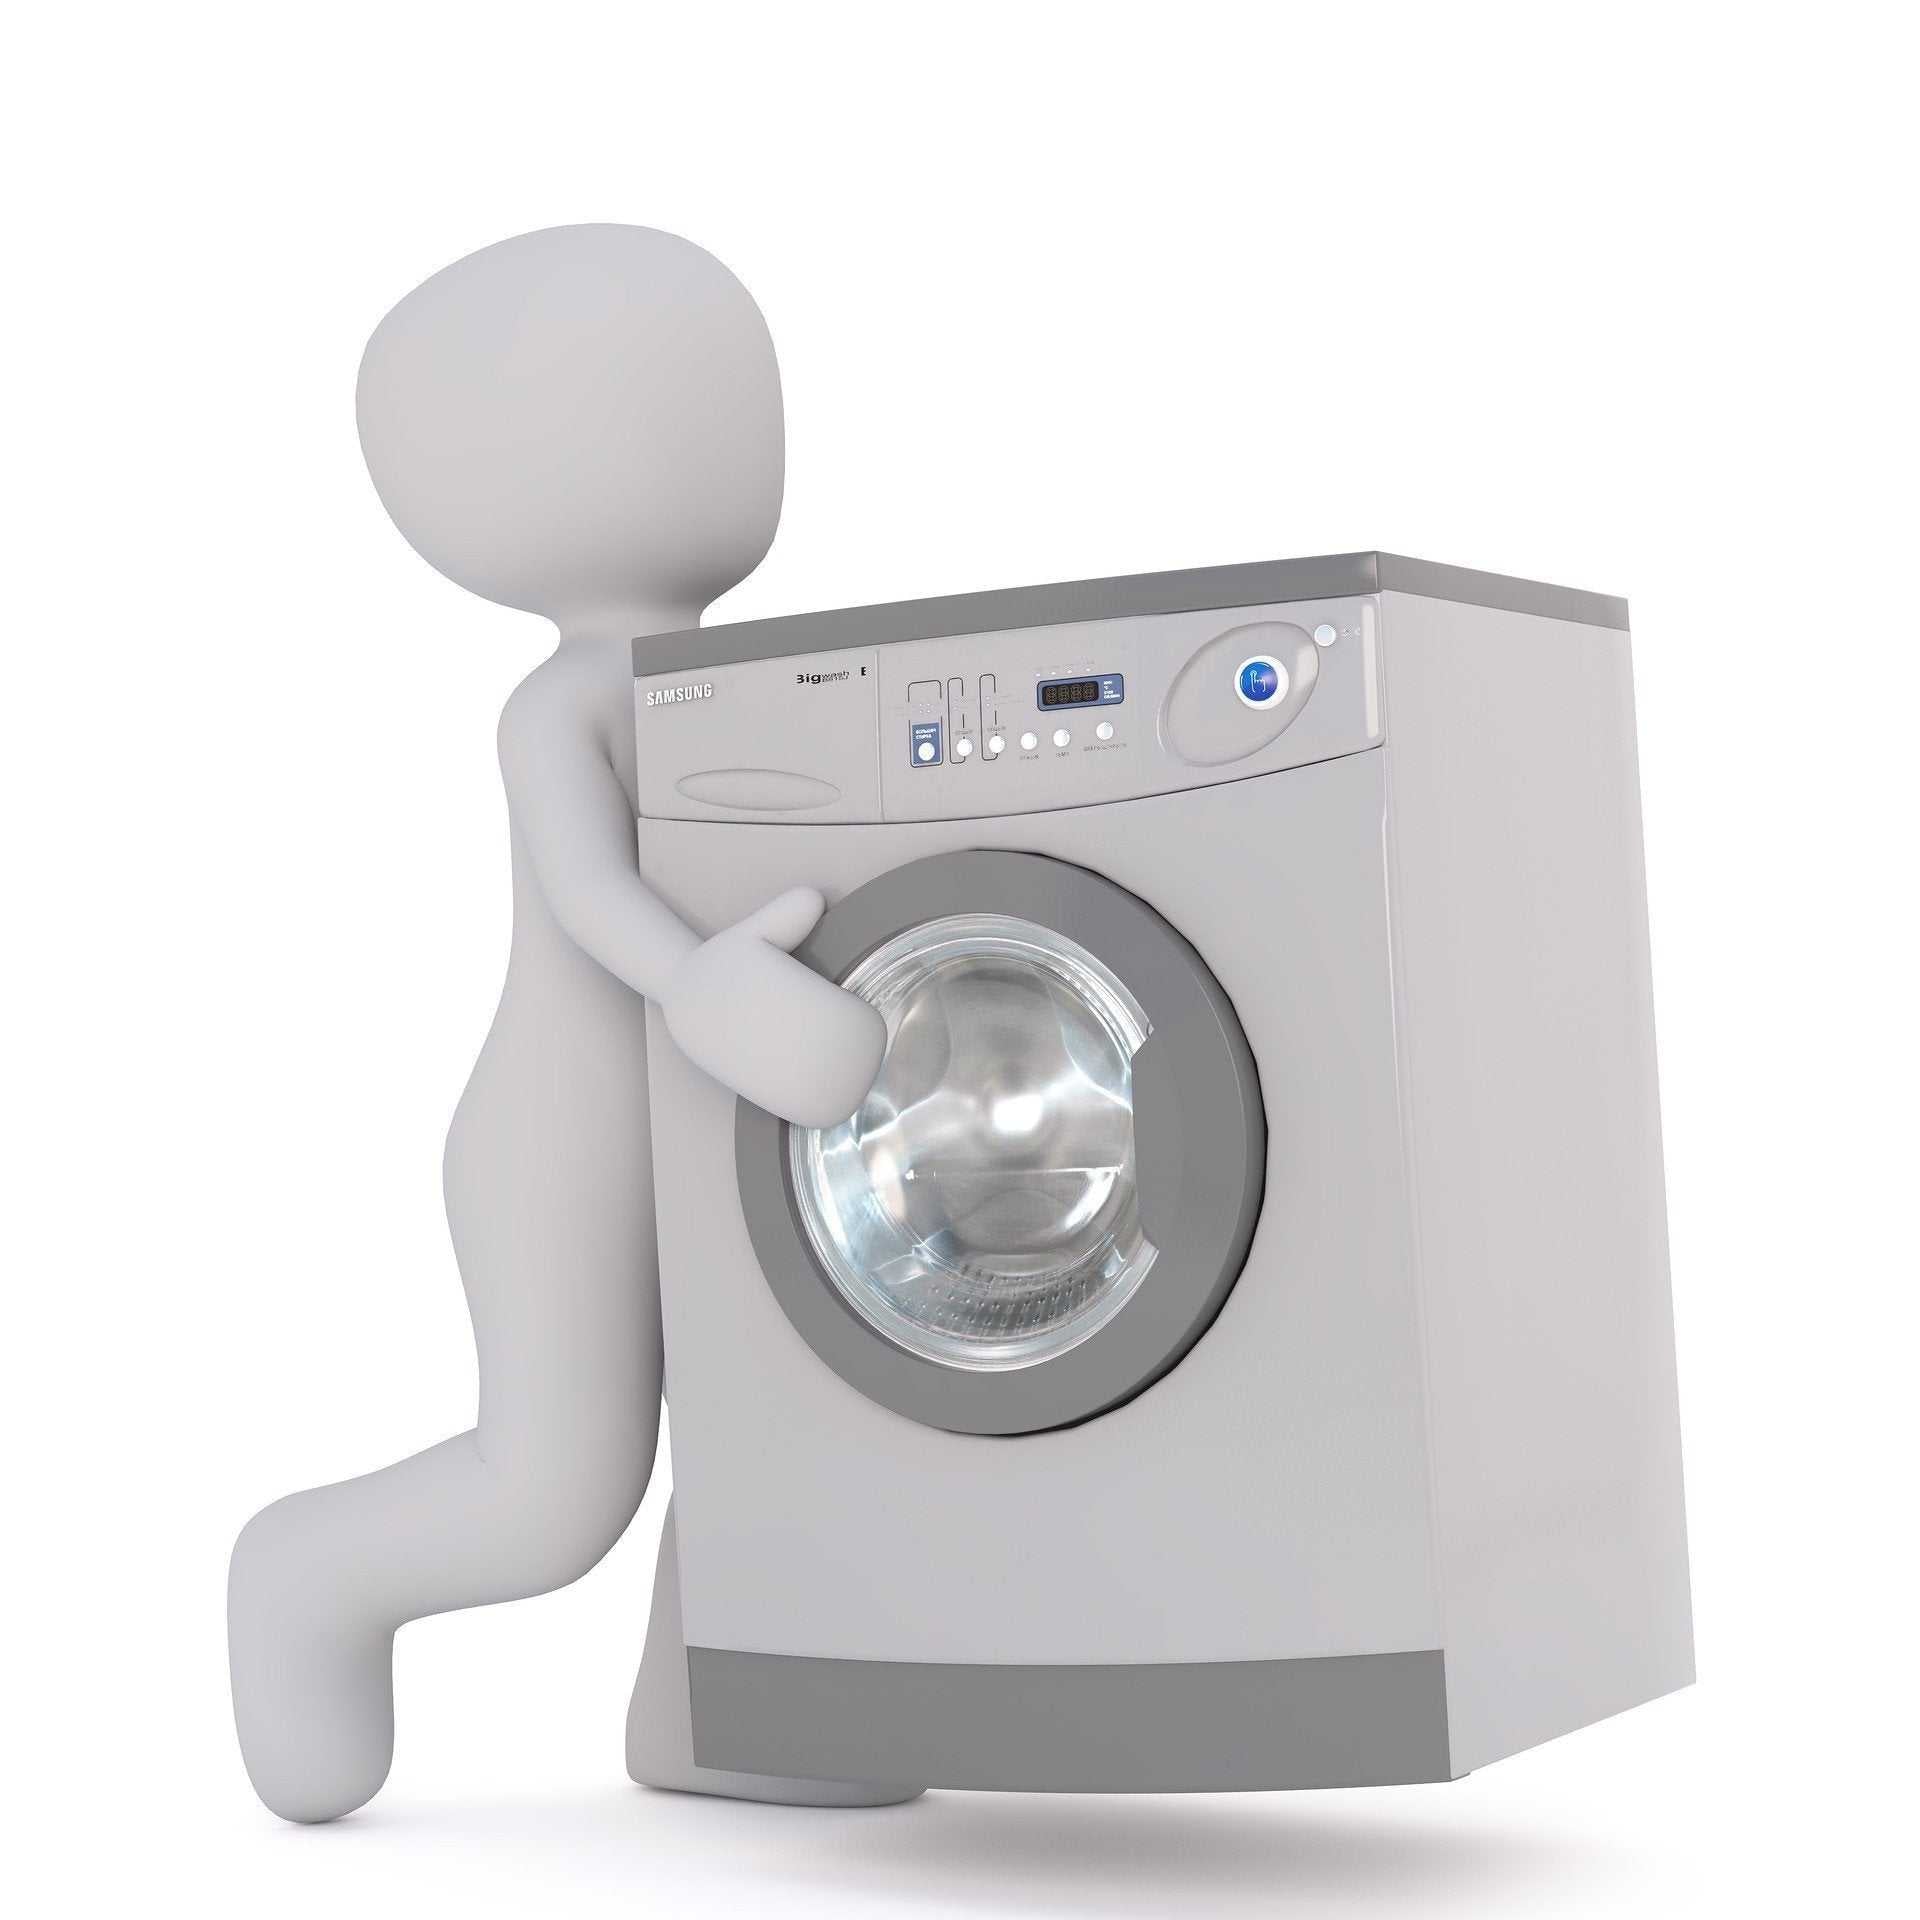 5 Ways of Protecting your Home Appliances